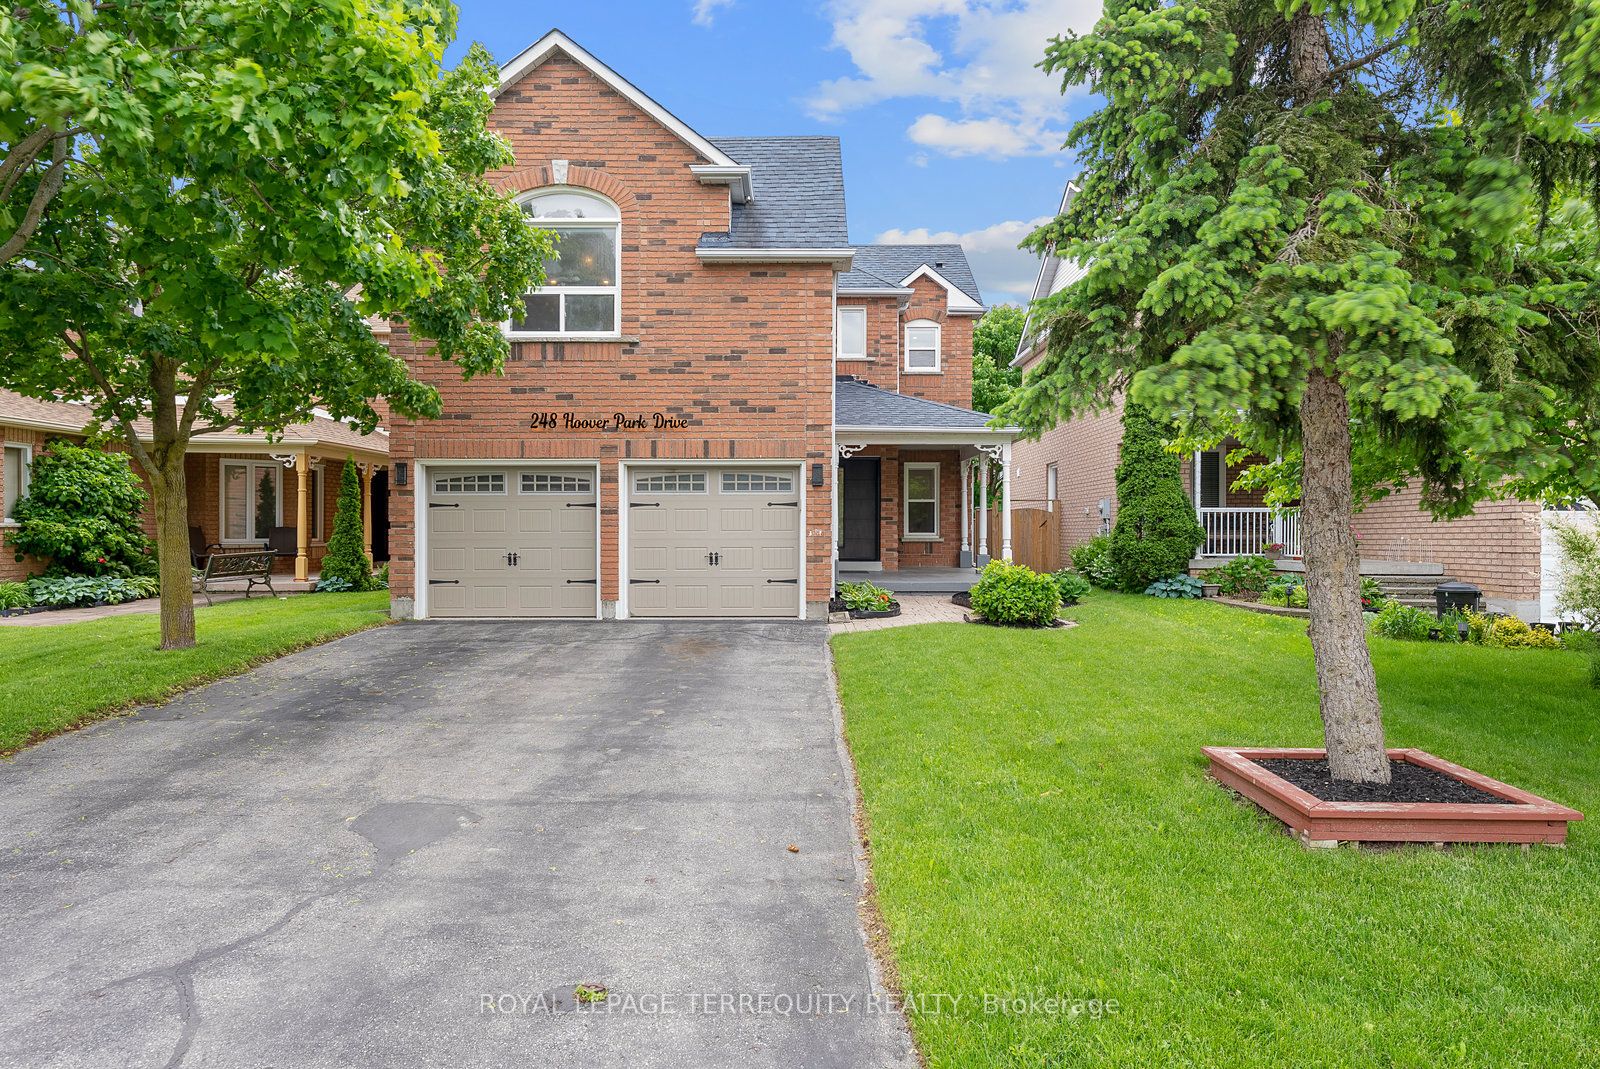 Detached house for sale at 248 Hoover Park Dr Whitchurch-Stouffville Ontario